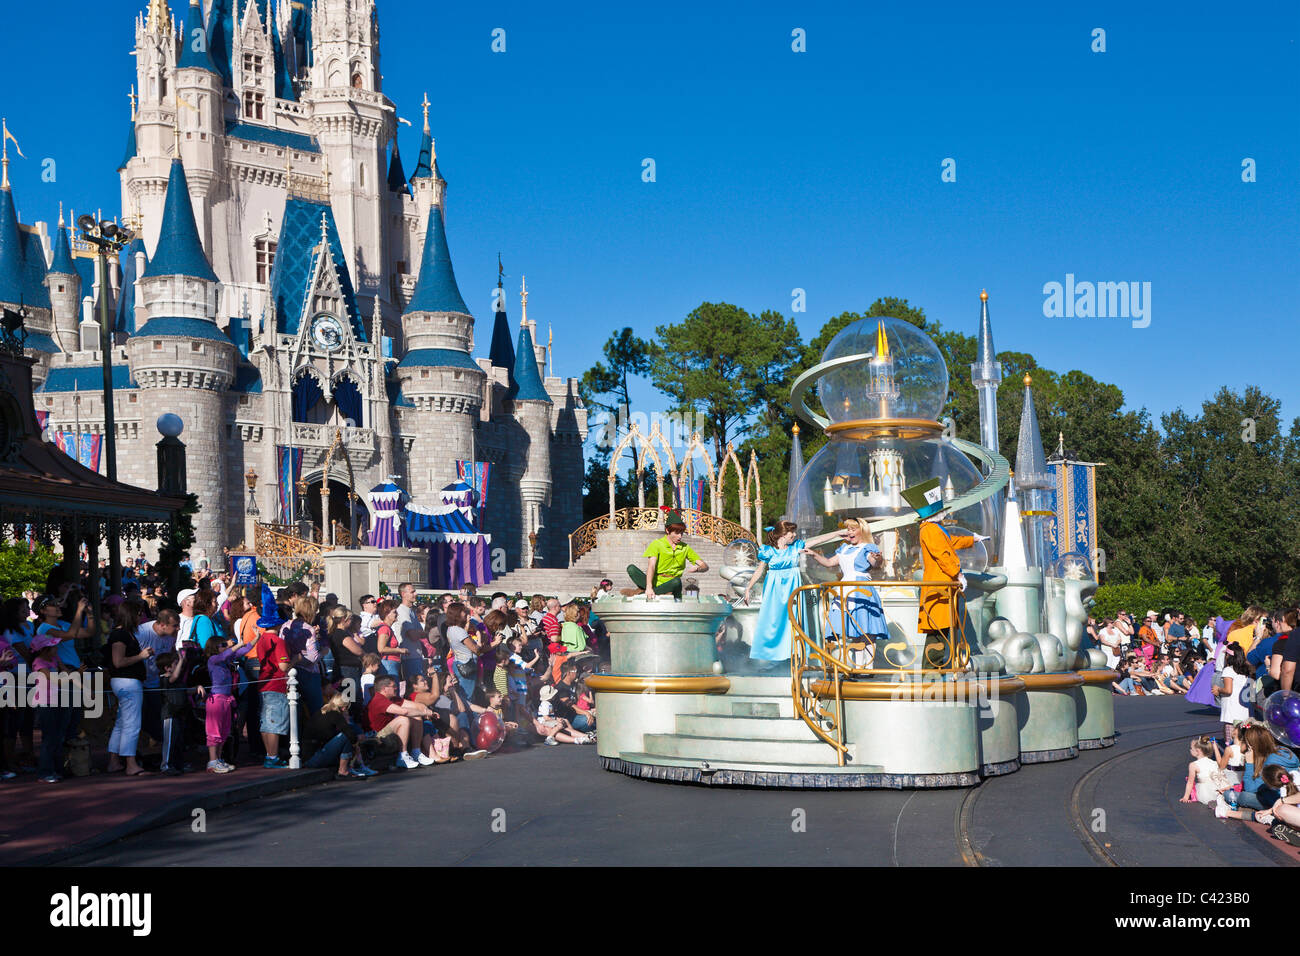 Disney characters ride a float in 'A Dream Come True' parade at the Magic Kingdom in Disney World, Kissimmee, Florida Stock Photo